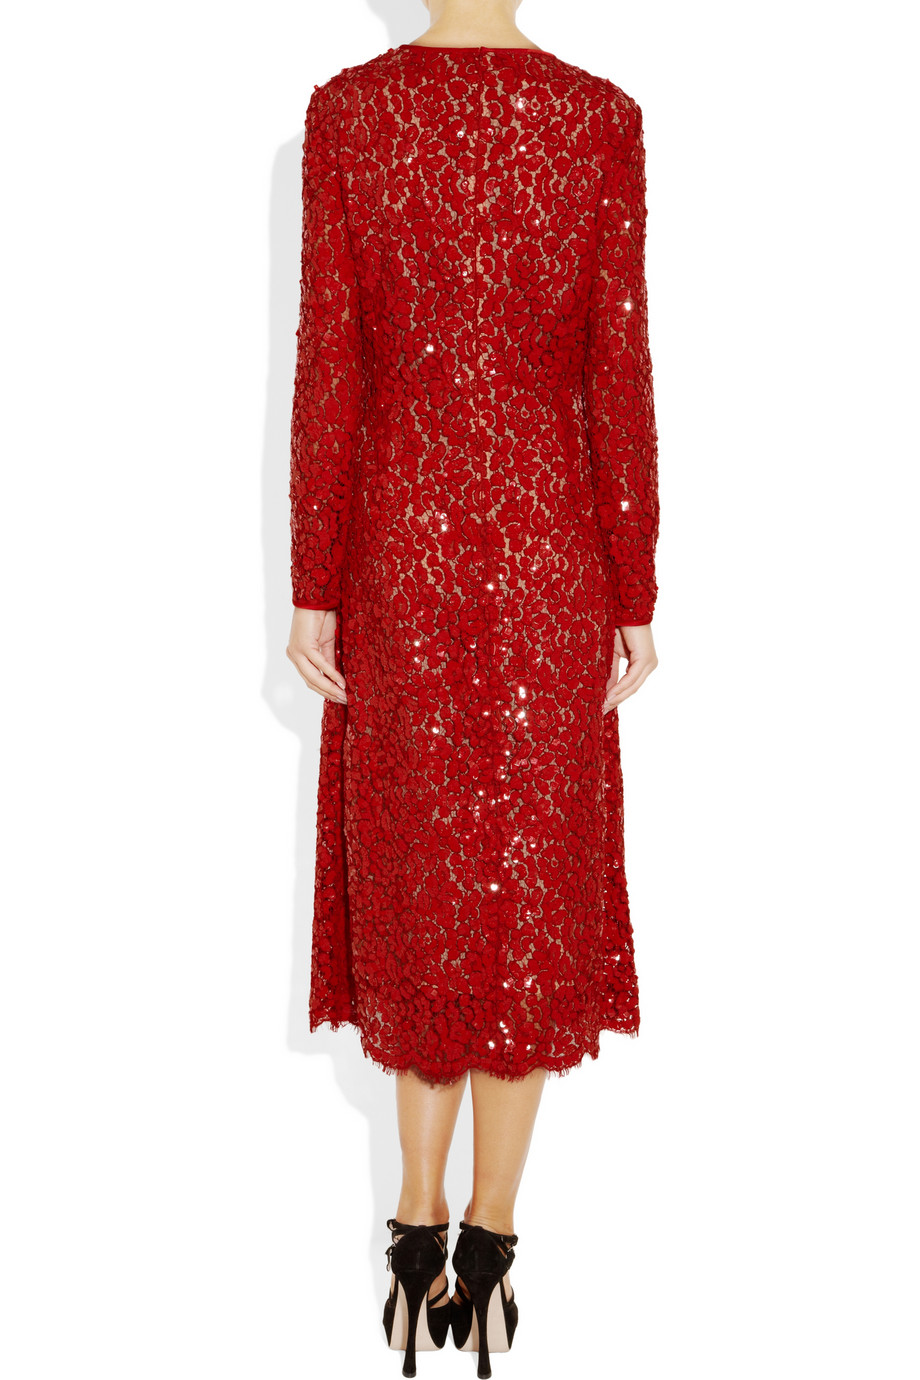 Lyst - Michael kors Sequined Lace Dress in Red